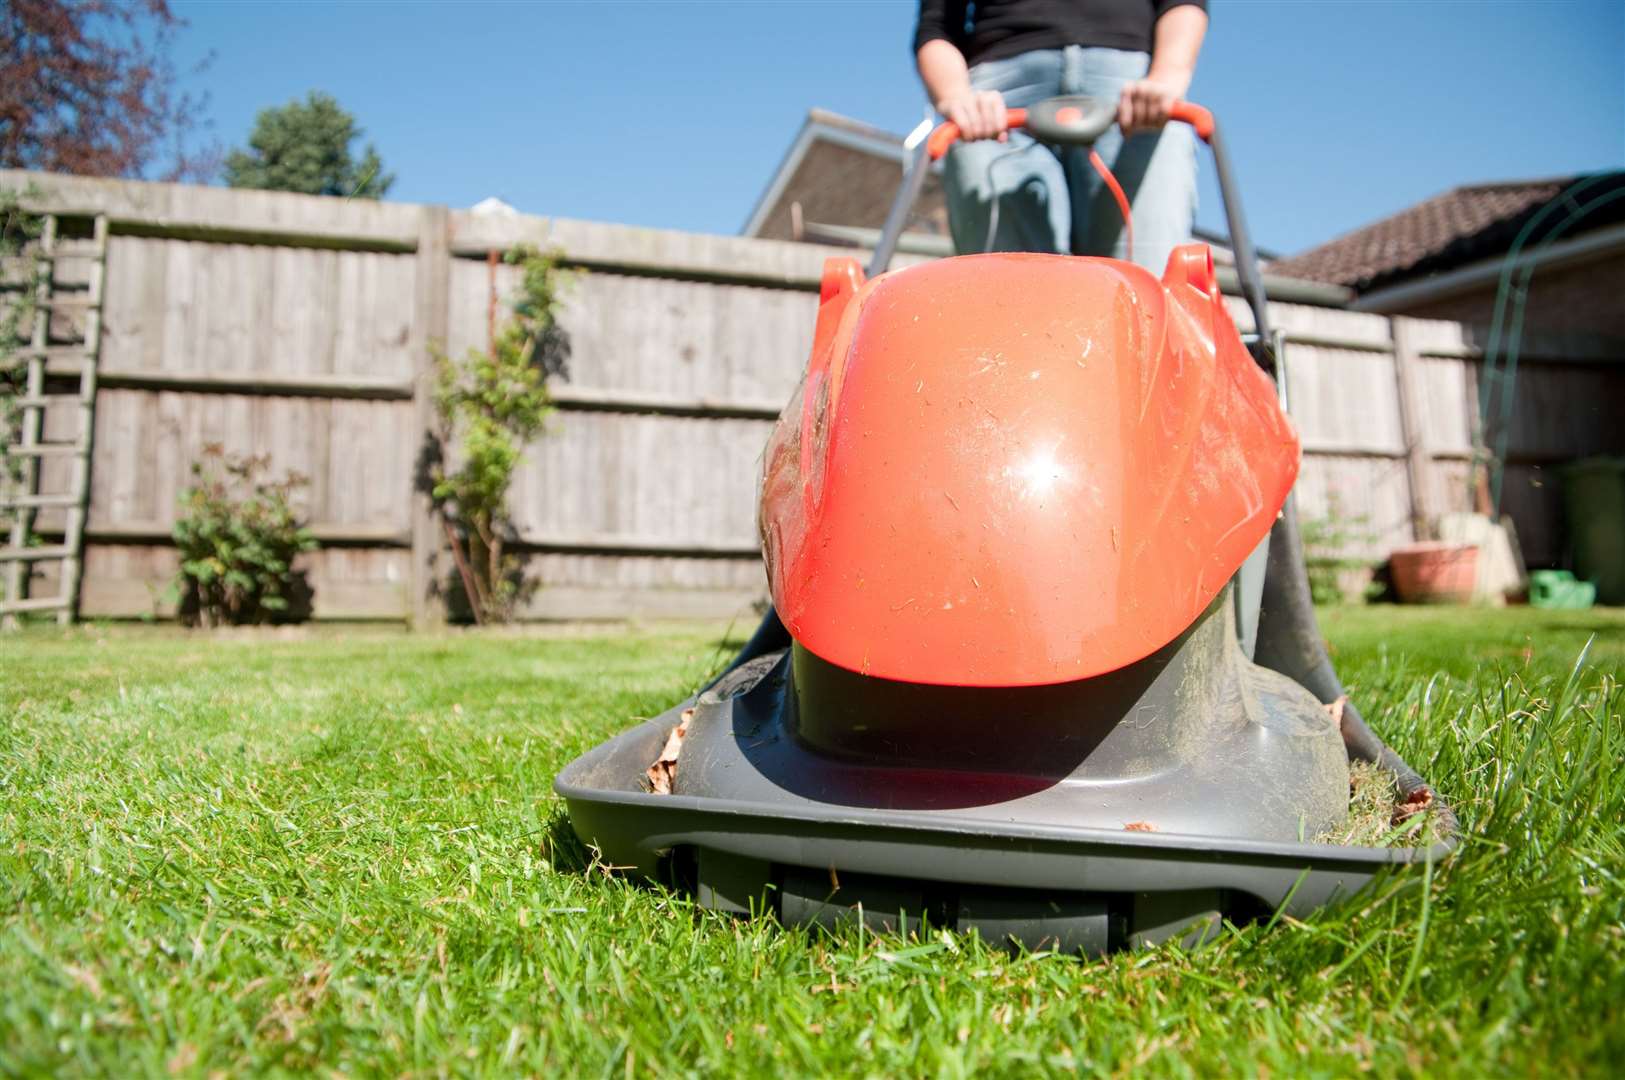 Mowing the lawn for 20 minutes can use almost 100 calories. Picture: iStock/PA